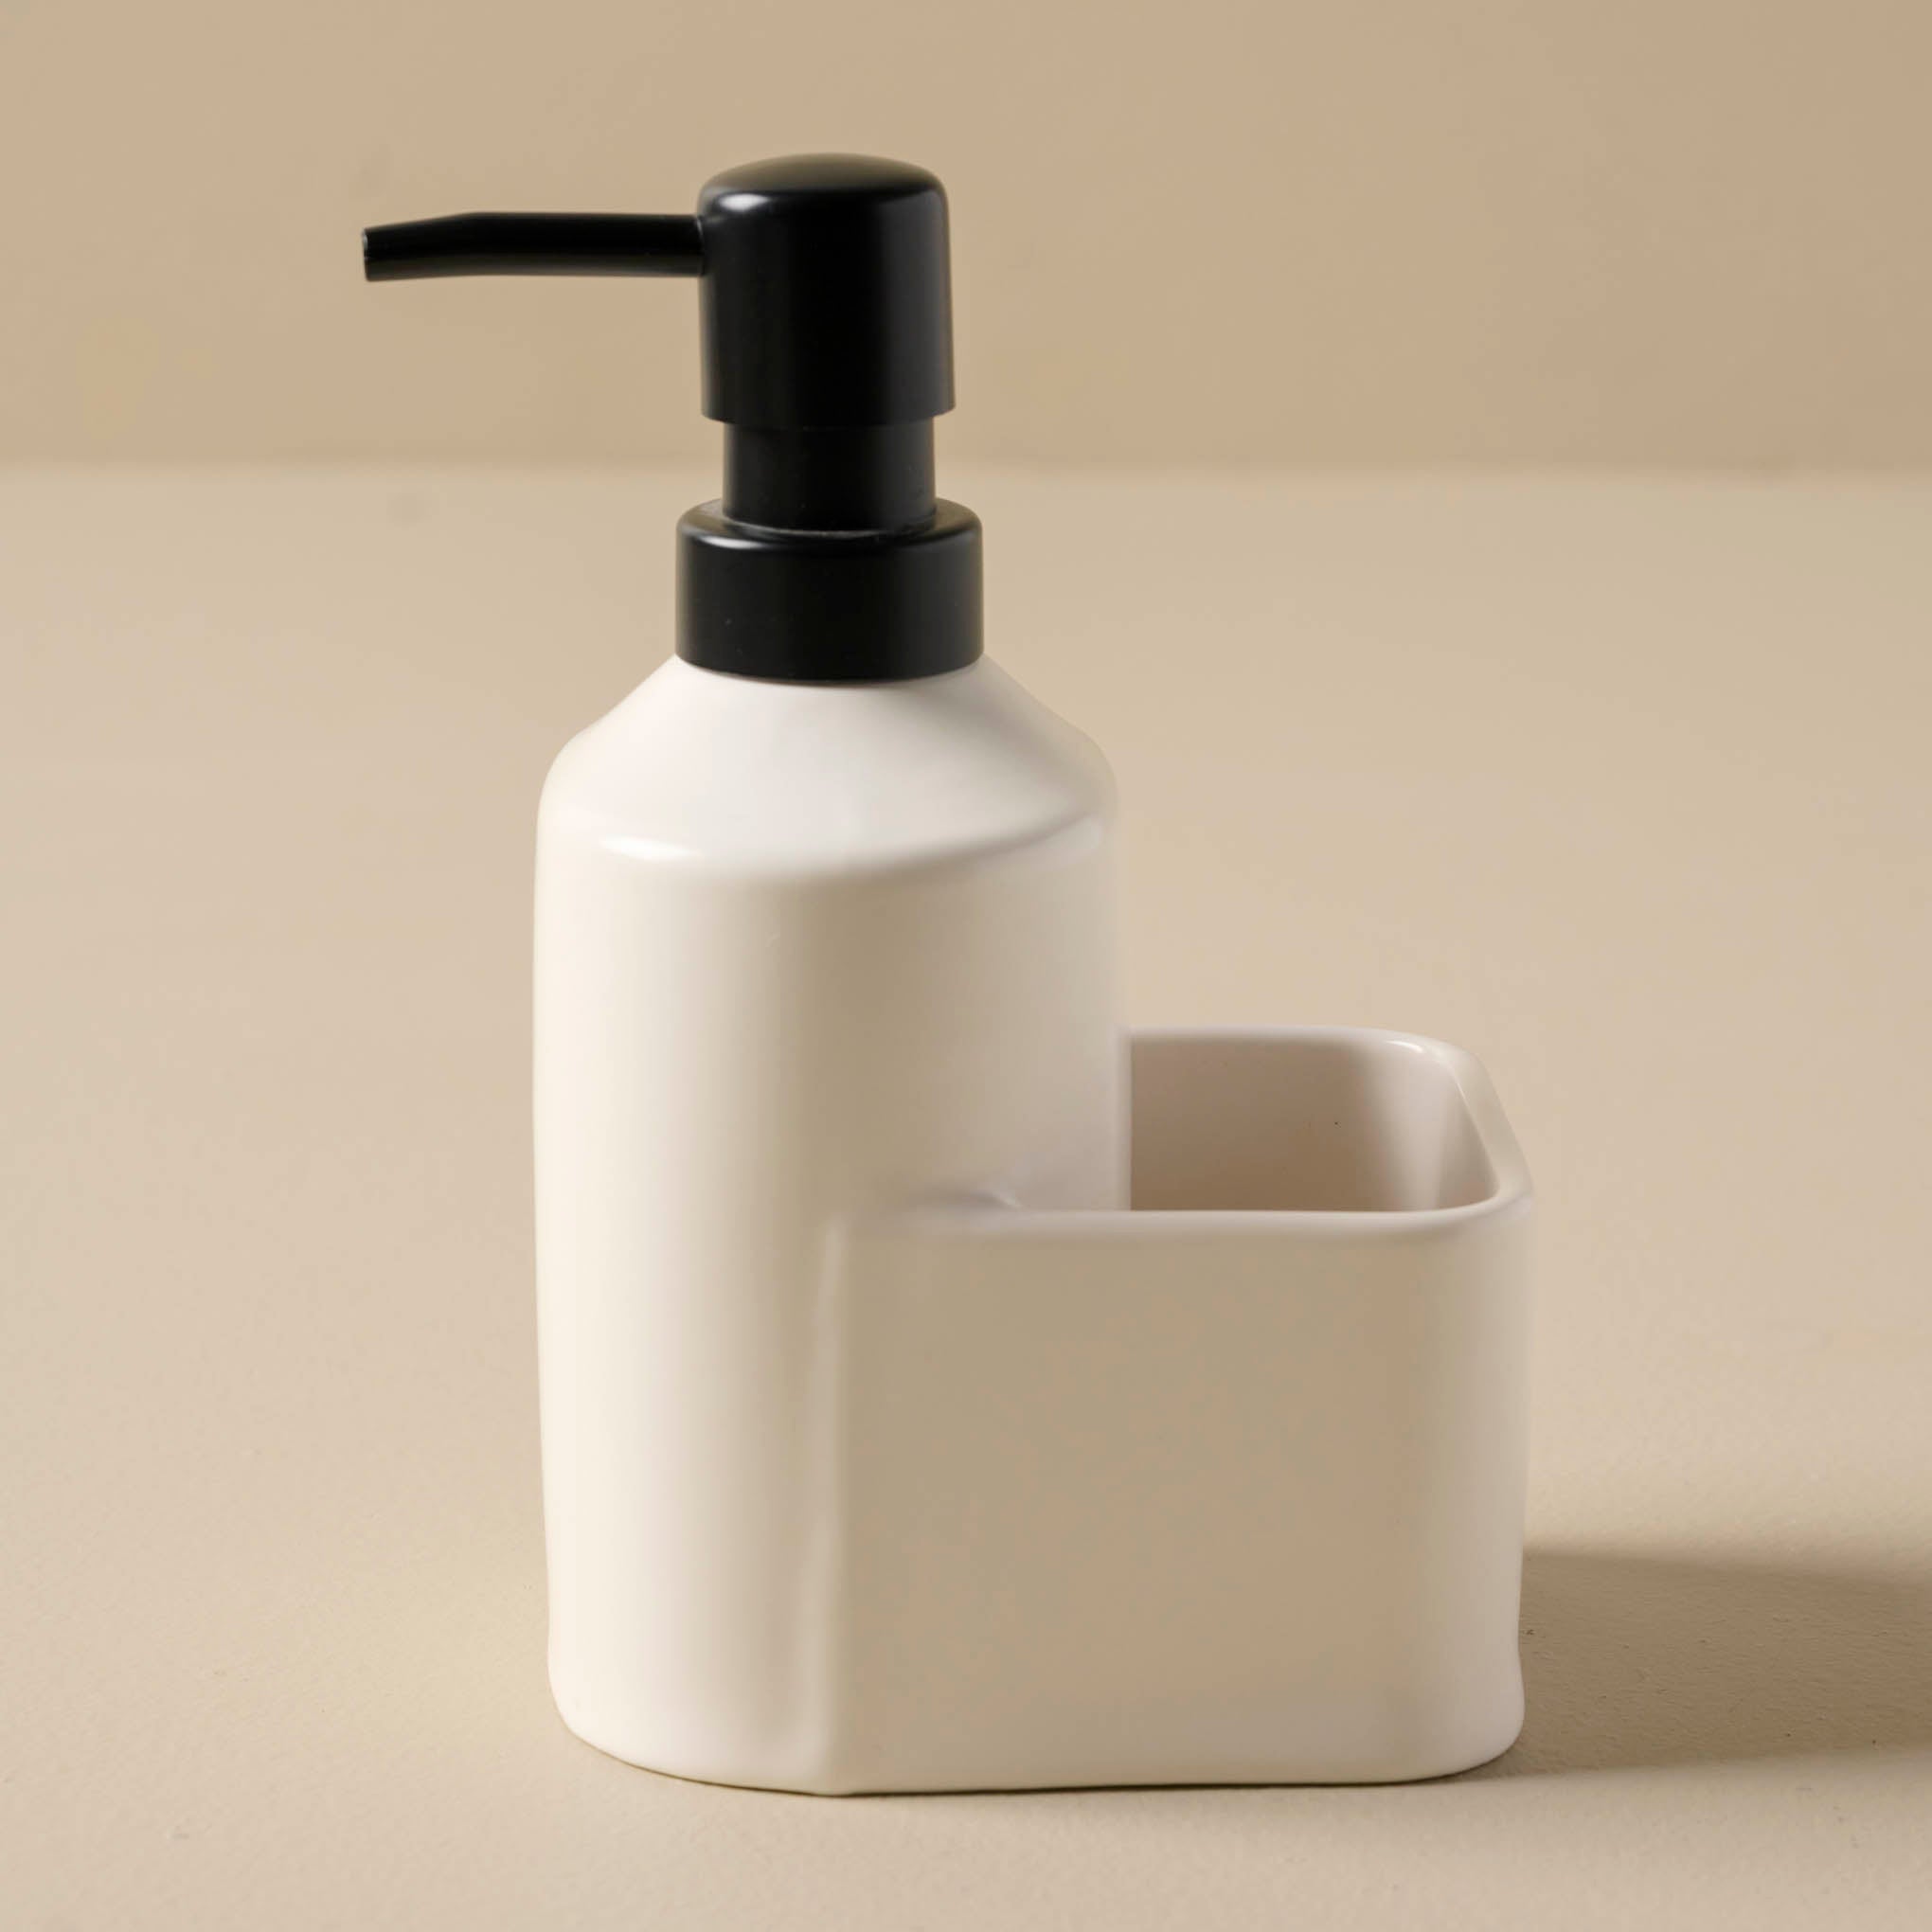 Soap Caddy $24.00